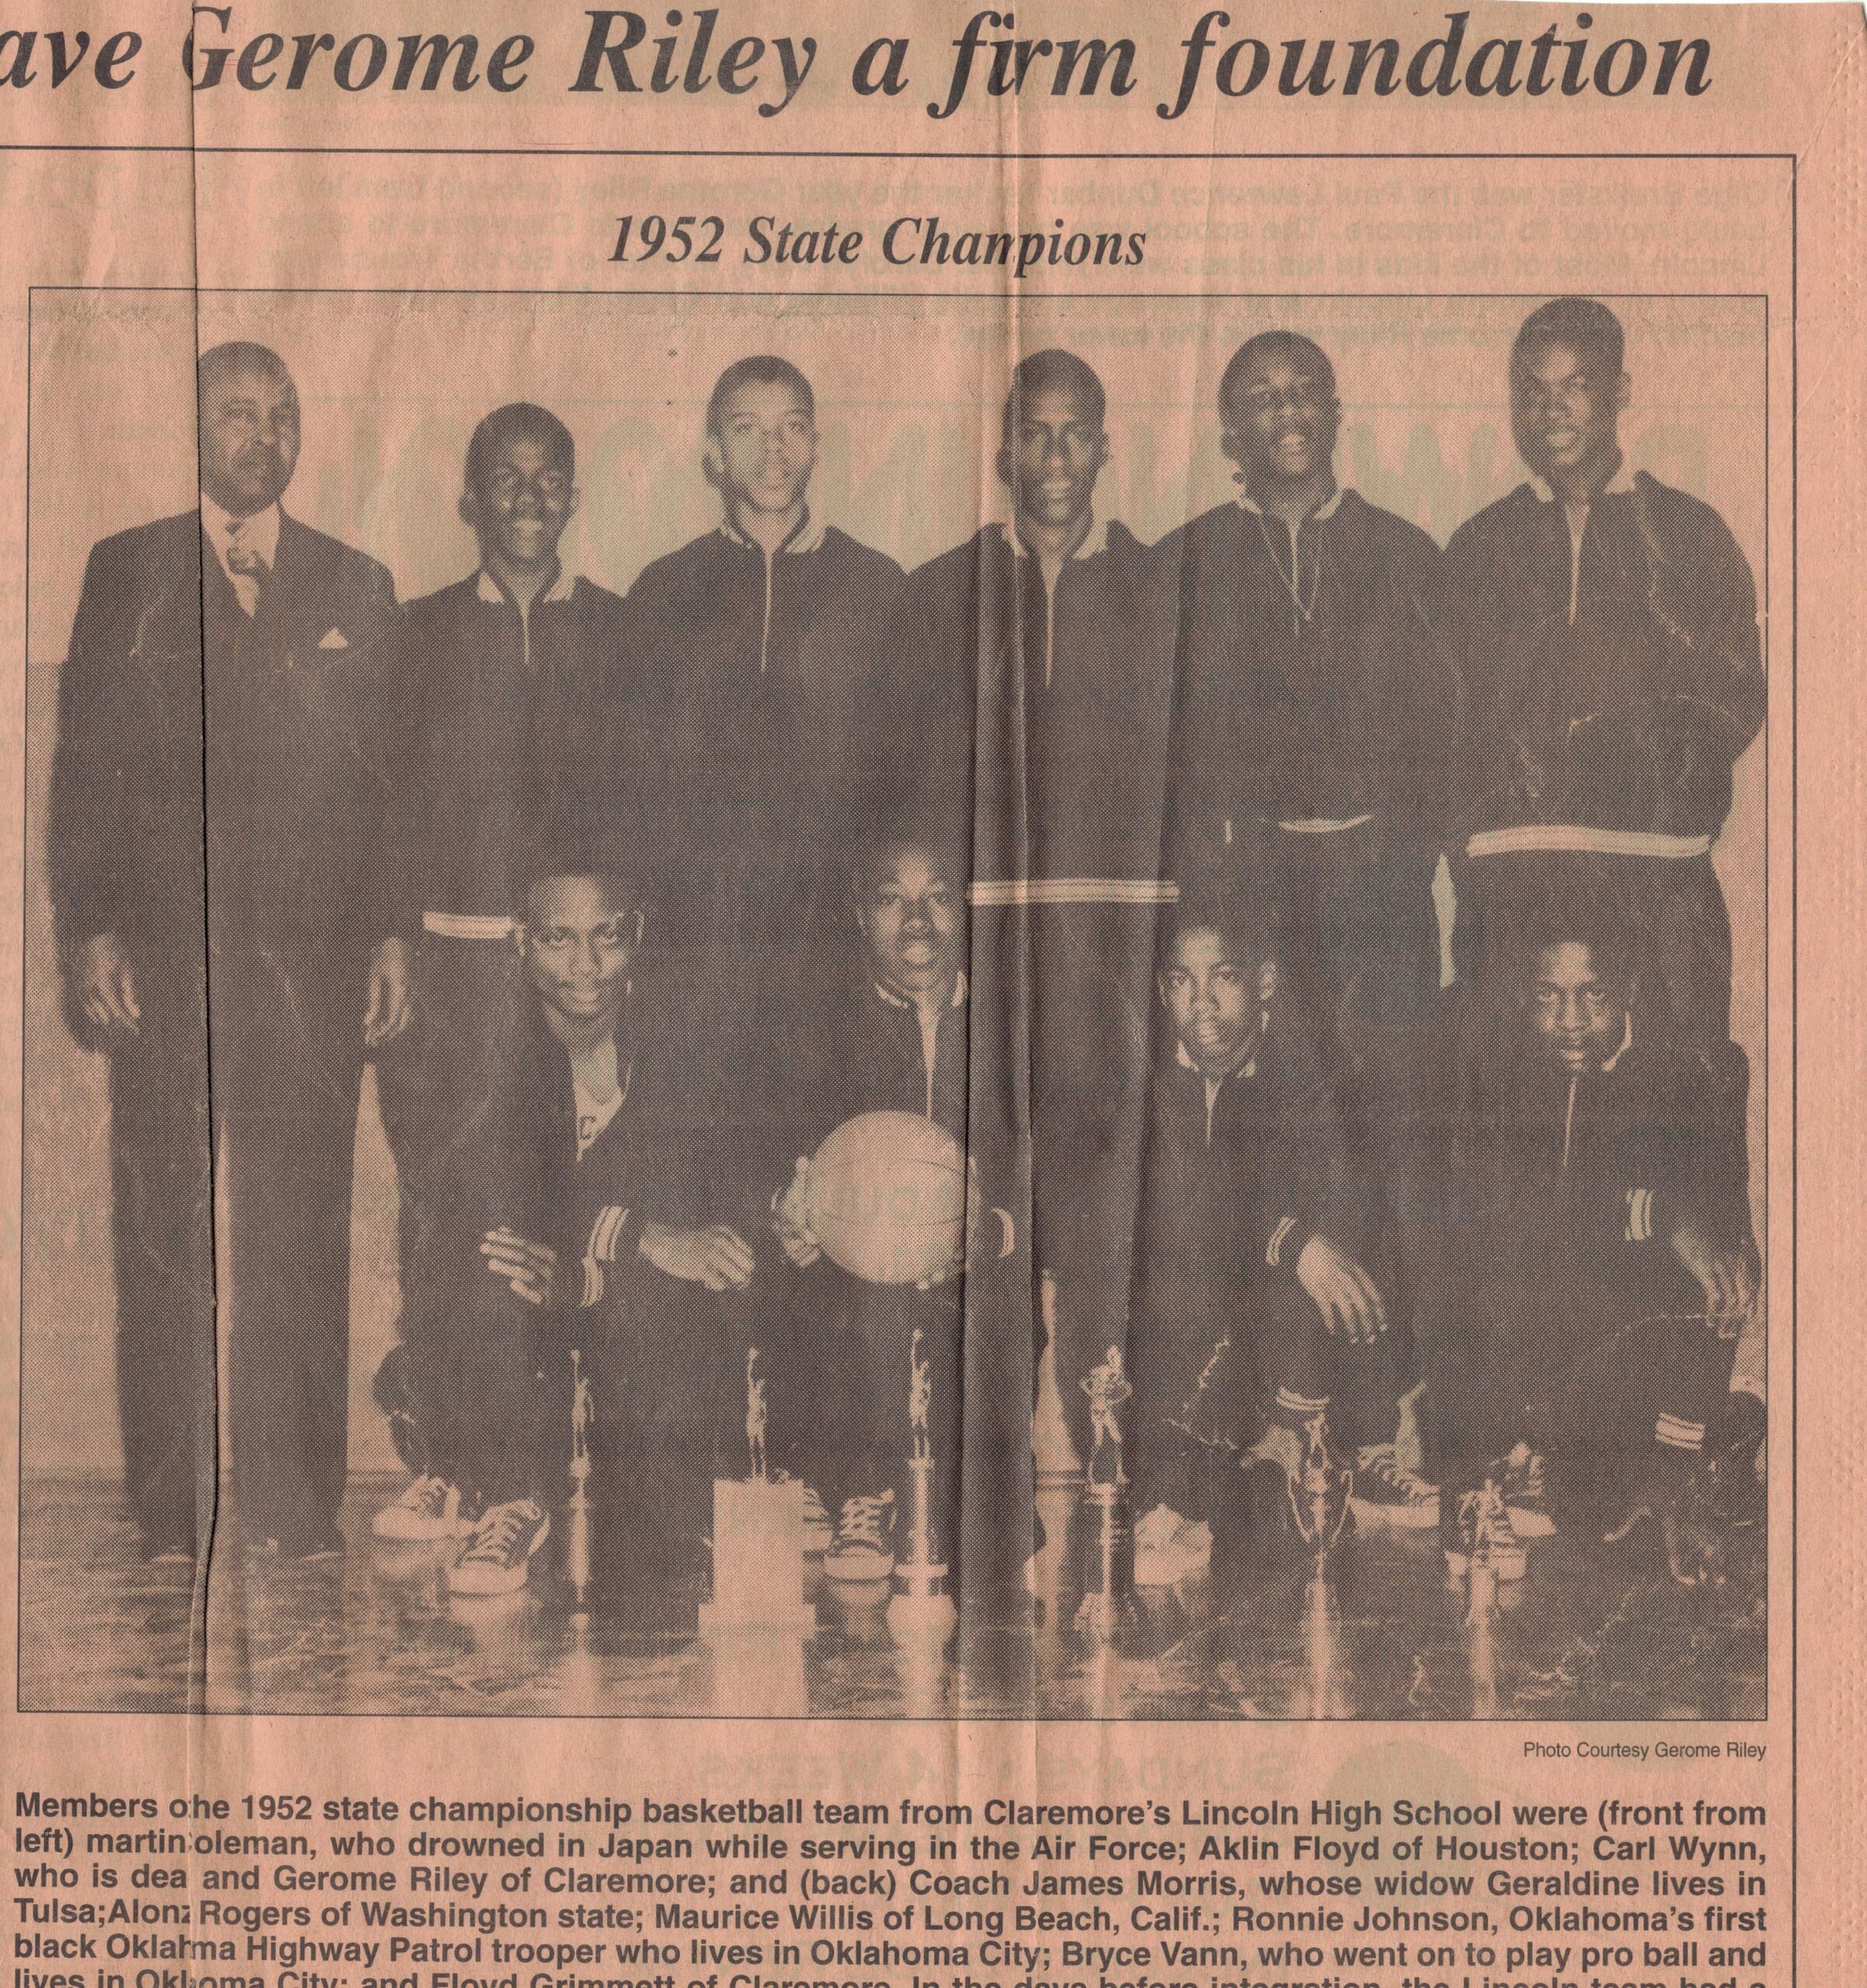 Photo of Black basketball team labeled "1952 State Champions" with article title and caption